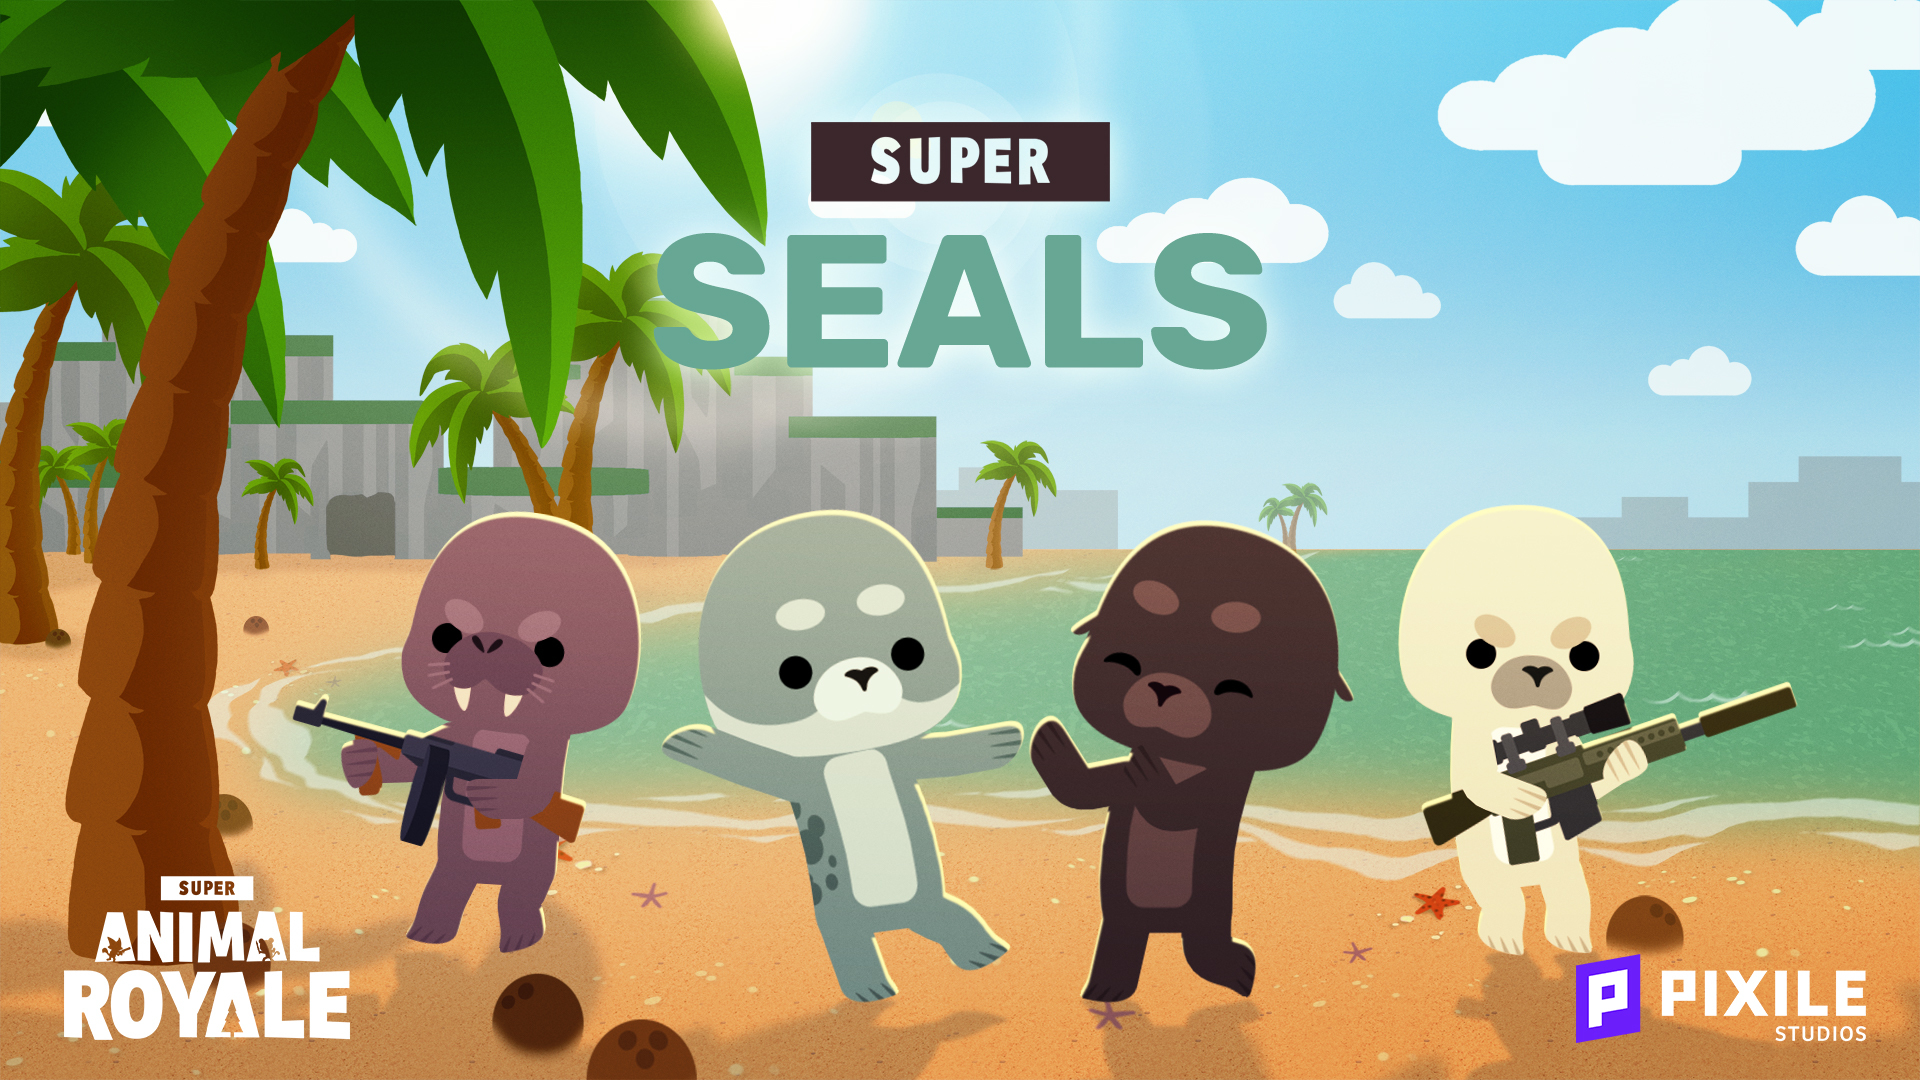 Super Animal Royale.96.6: Super Seals Arrive in the Research Lab